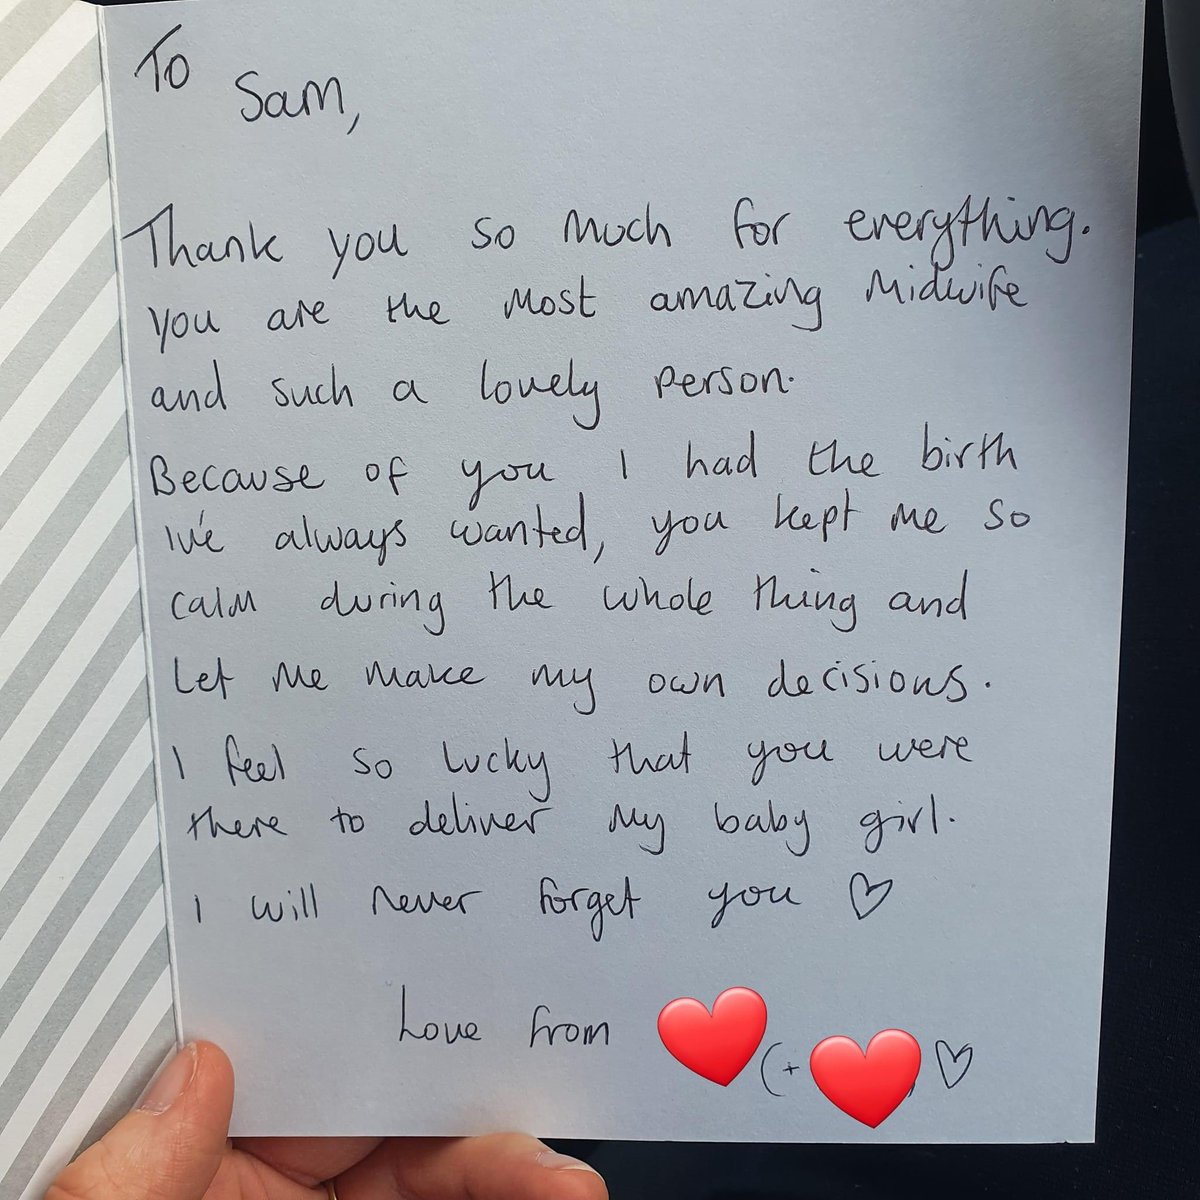 In the middle of a very busy period for our #continuity teams, a beautifully written card like this is a lovely reminder of the impact we have and the difference we make. So well deserved for lovely #TeamOpal midwife Sam who goes above and beyond for her women! 🤍 #CoC